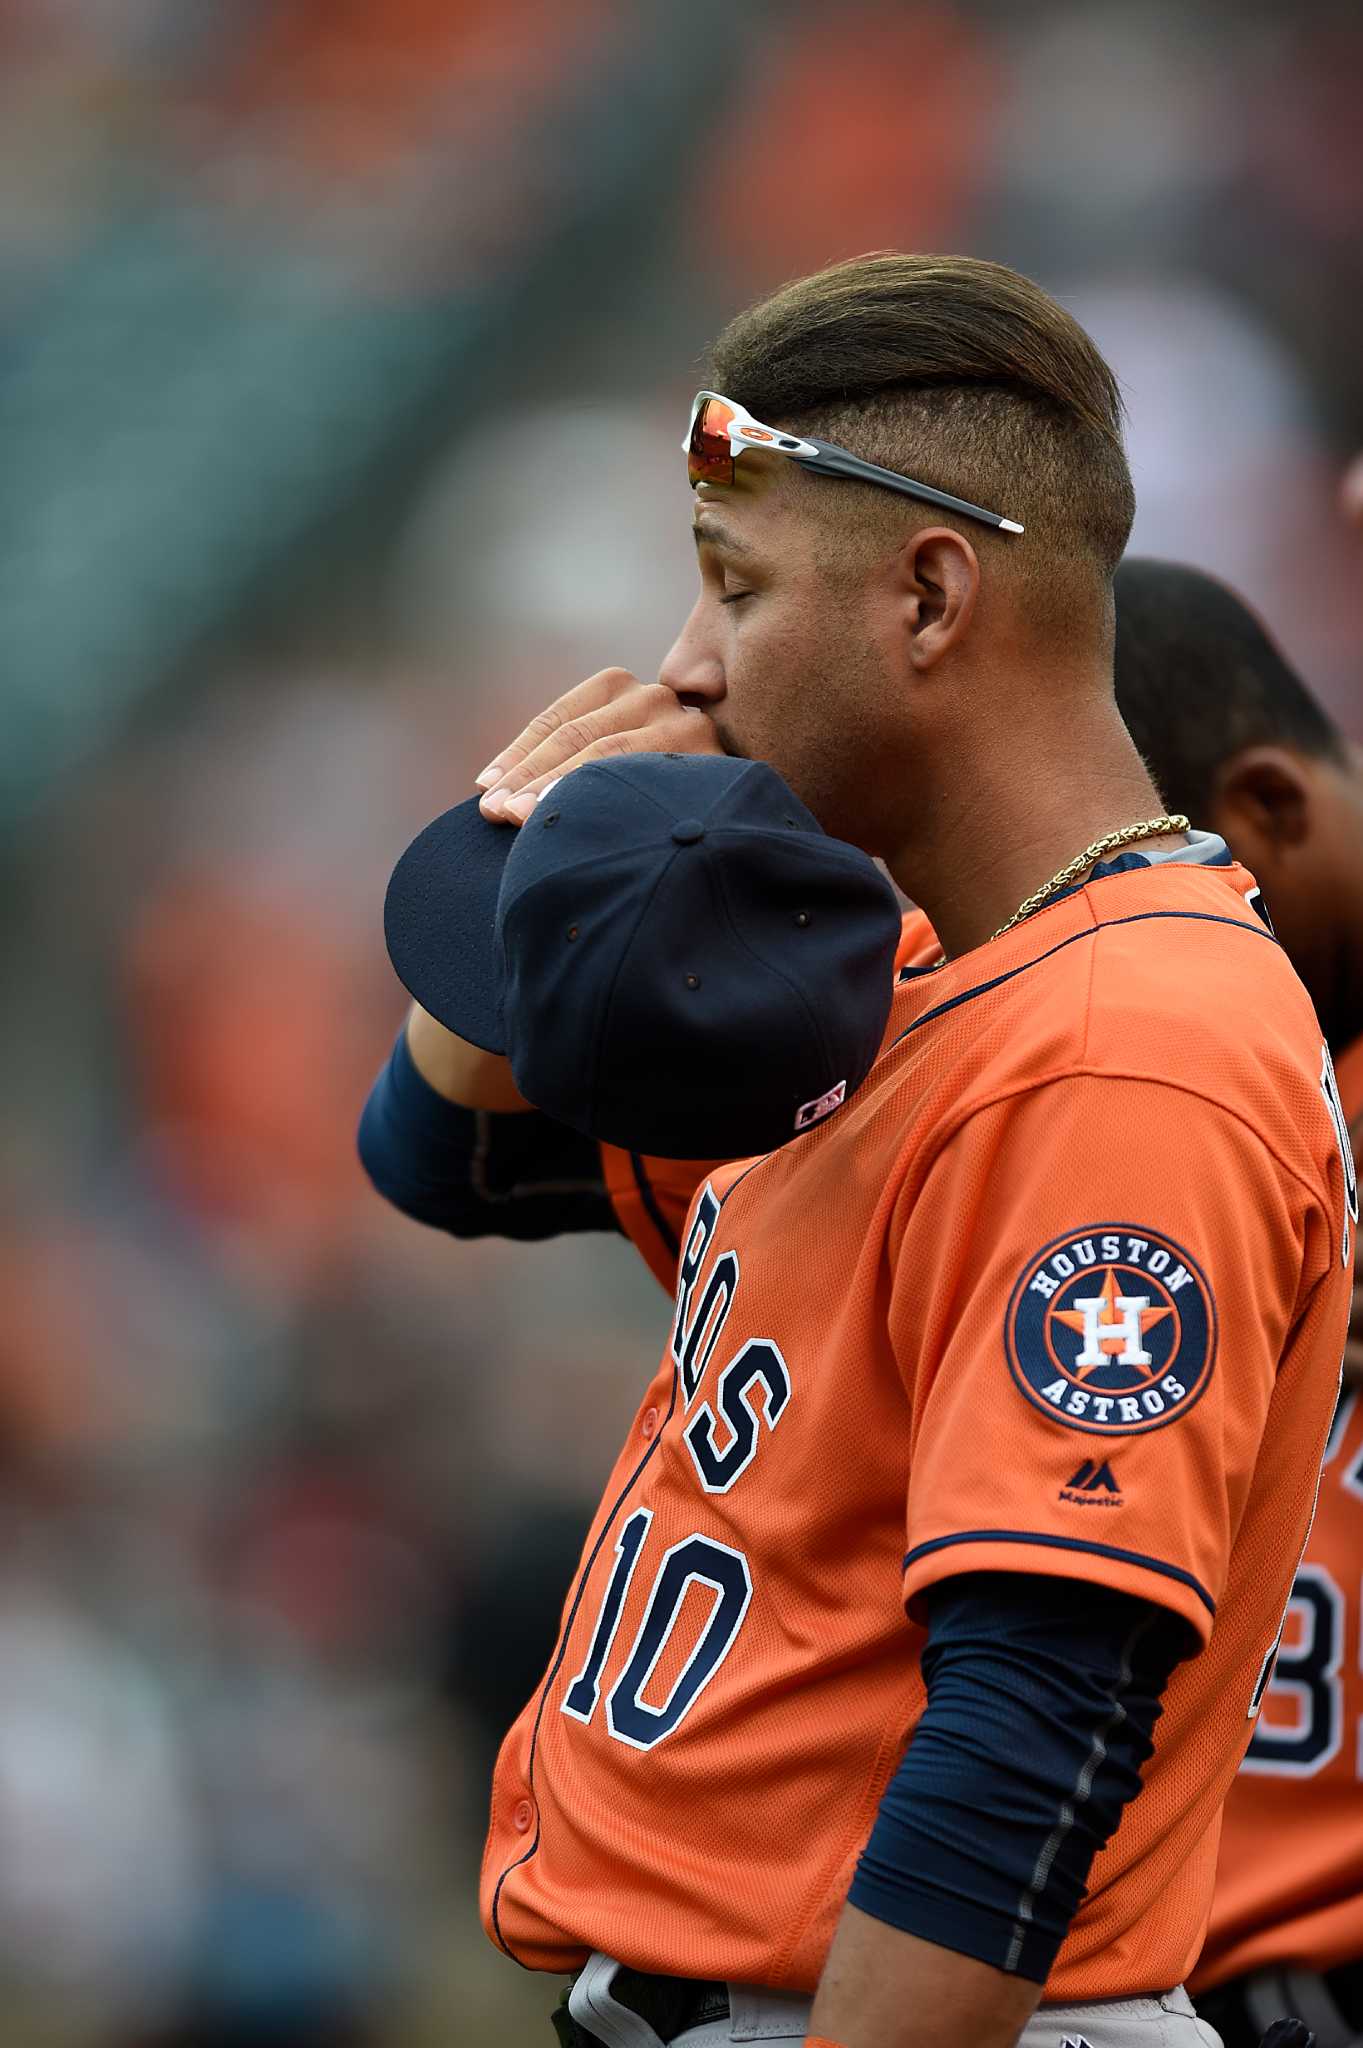 Astros' Yulieski Gurriel excited for his debut